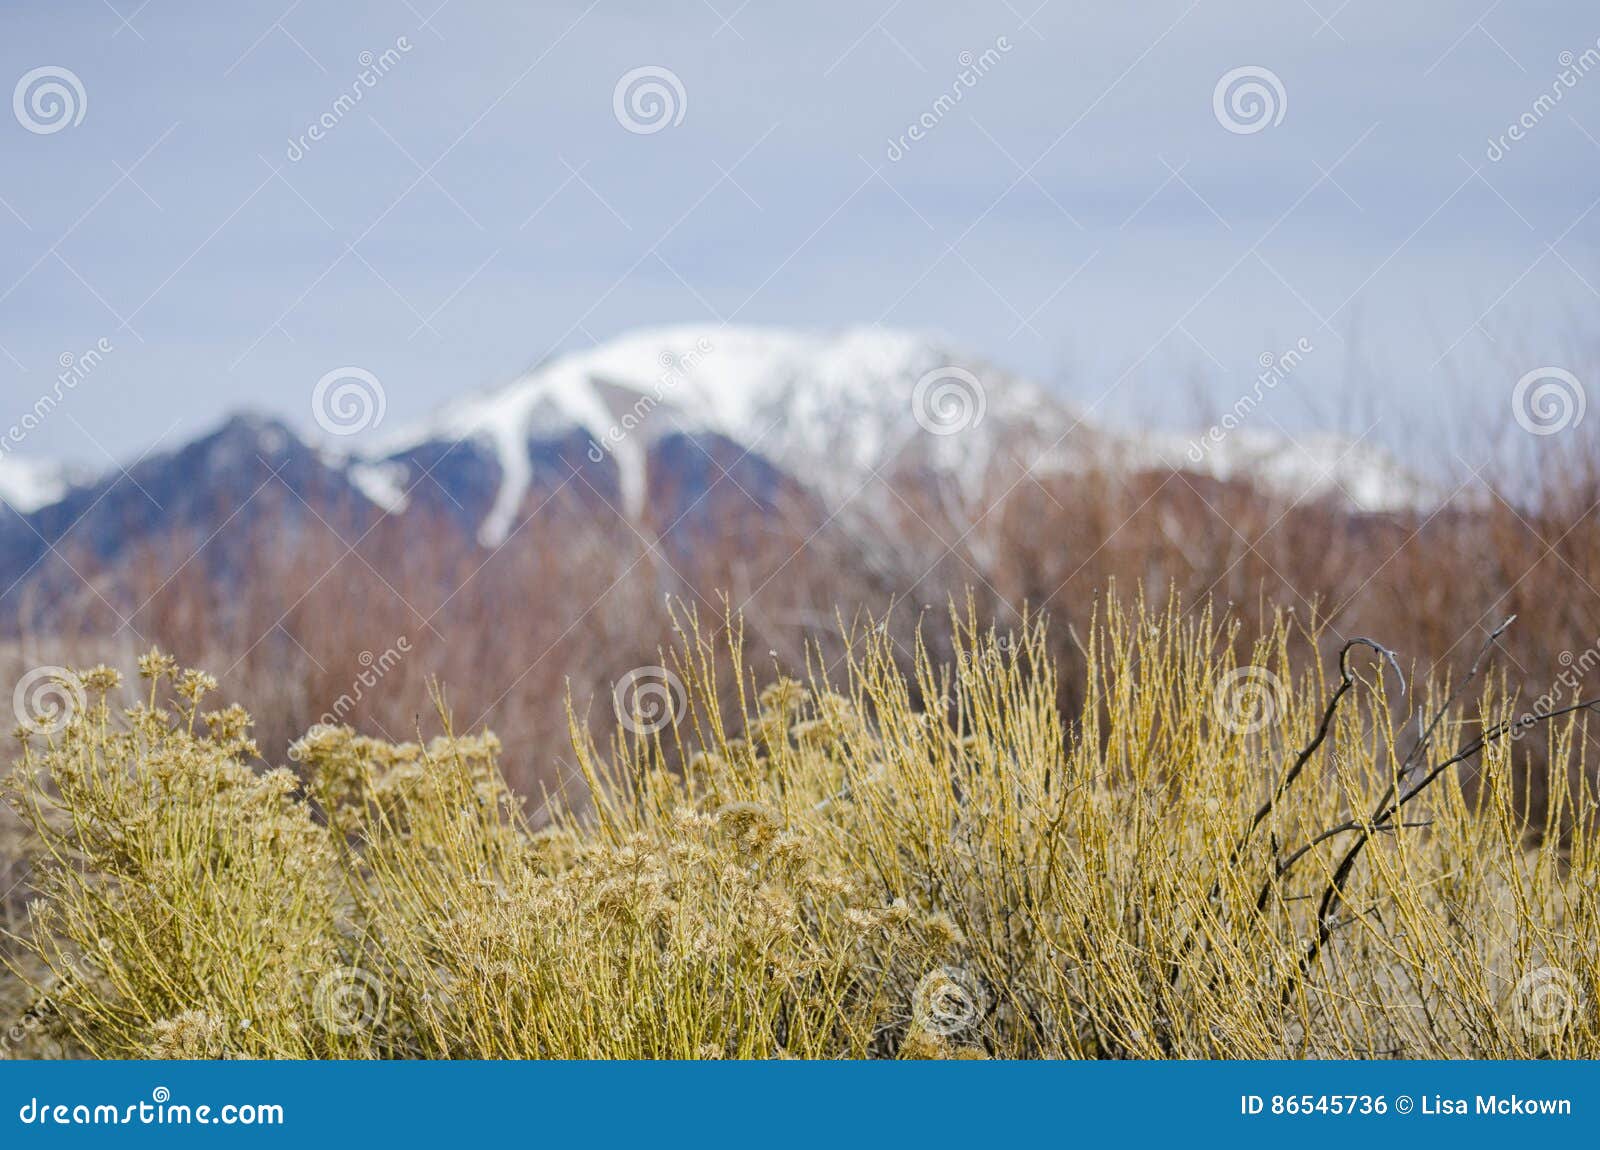 rubber rabbit brush plants with the alpine peaks of the sangre de cristo mountains in background